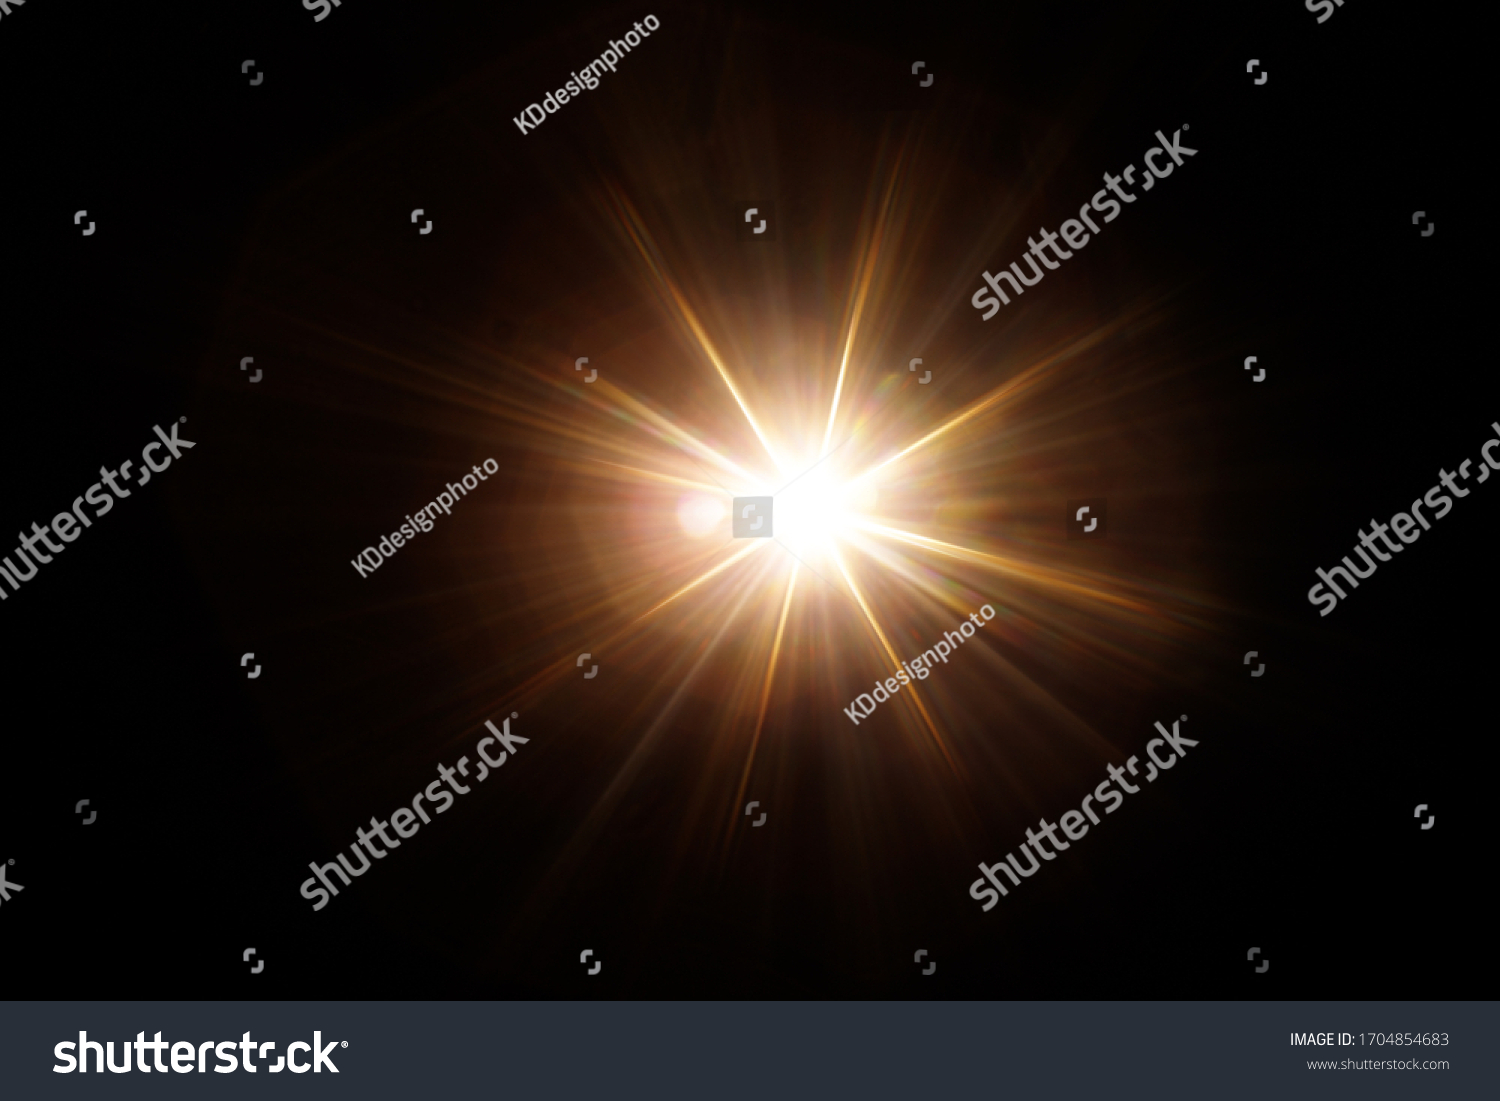 Easy to add lens flare effects for overlay designs or screen blending mode to make high-quality images. Abstract sun burst, digital flare, iridescent glare over black background. #1704854683